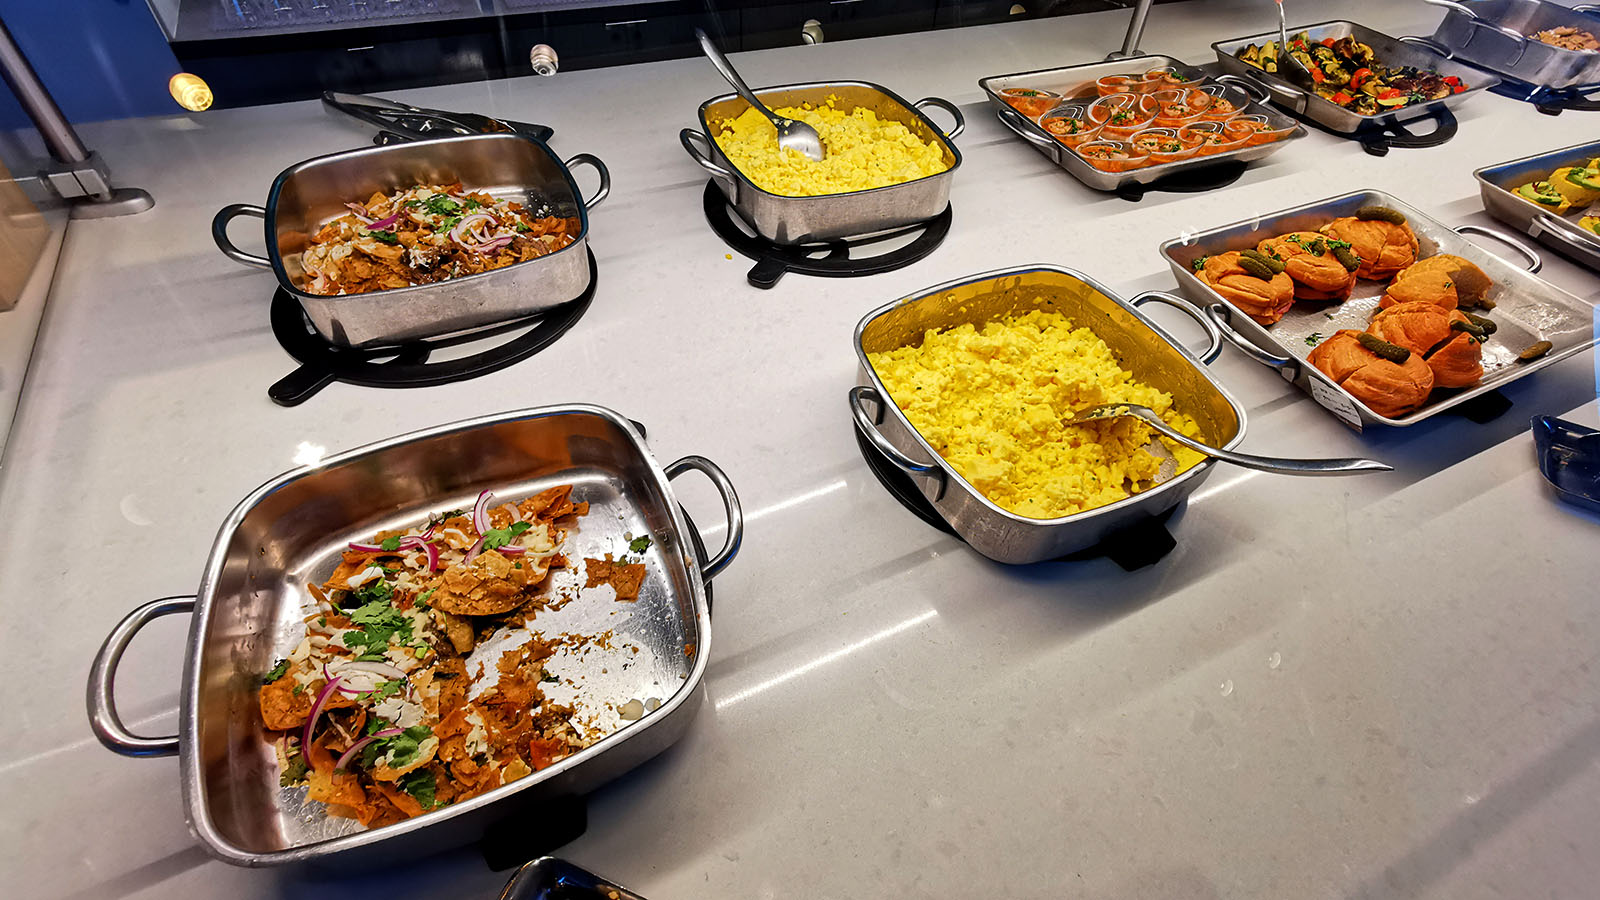 Buffet spread in the American Airlines Flagship Lounge, Los Angeles